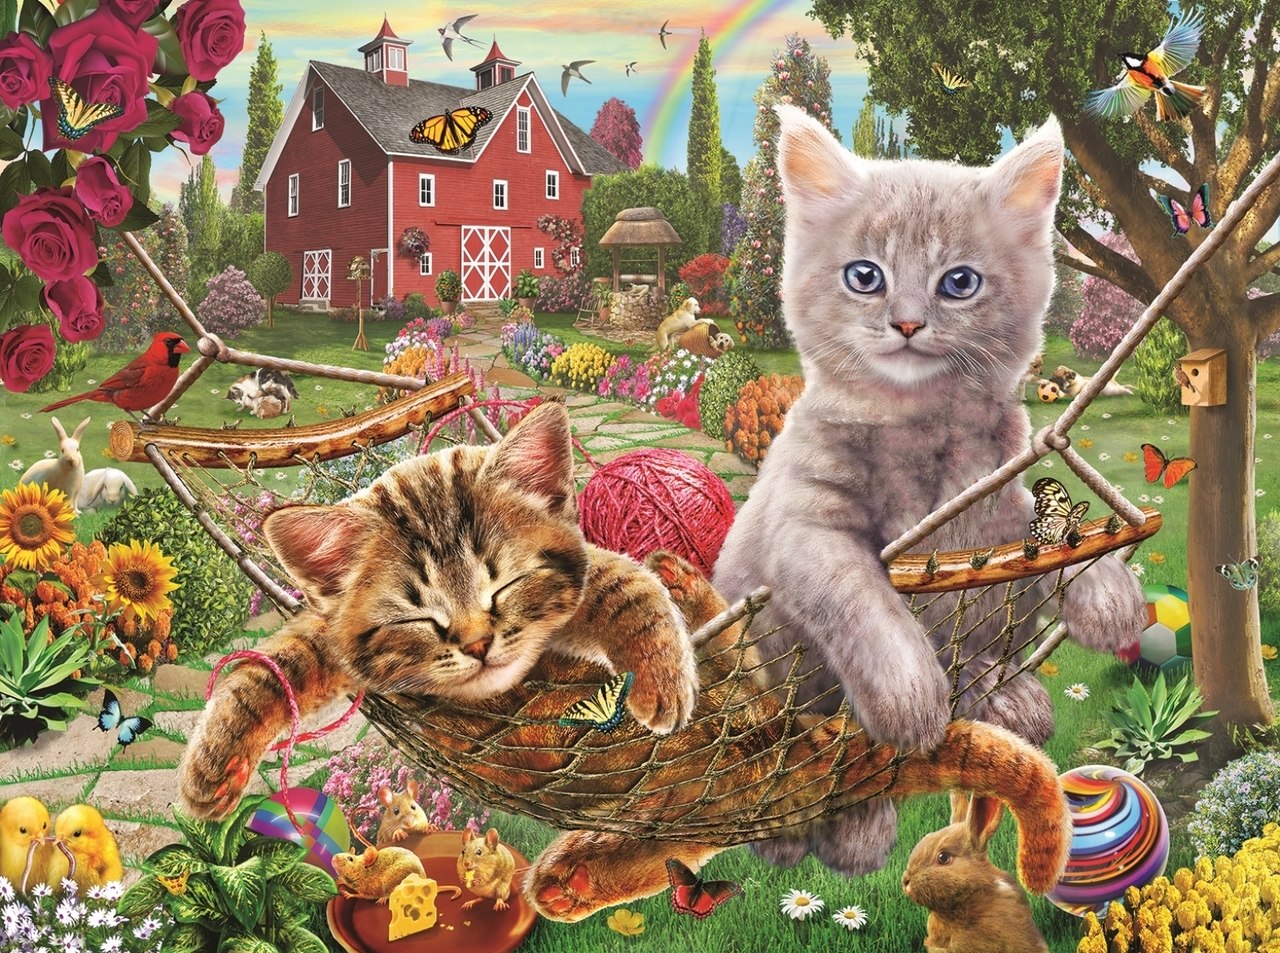 Cats on the Farm - 300pc Jigsaw Puzzle By Sunsout  			  					NEW